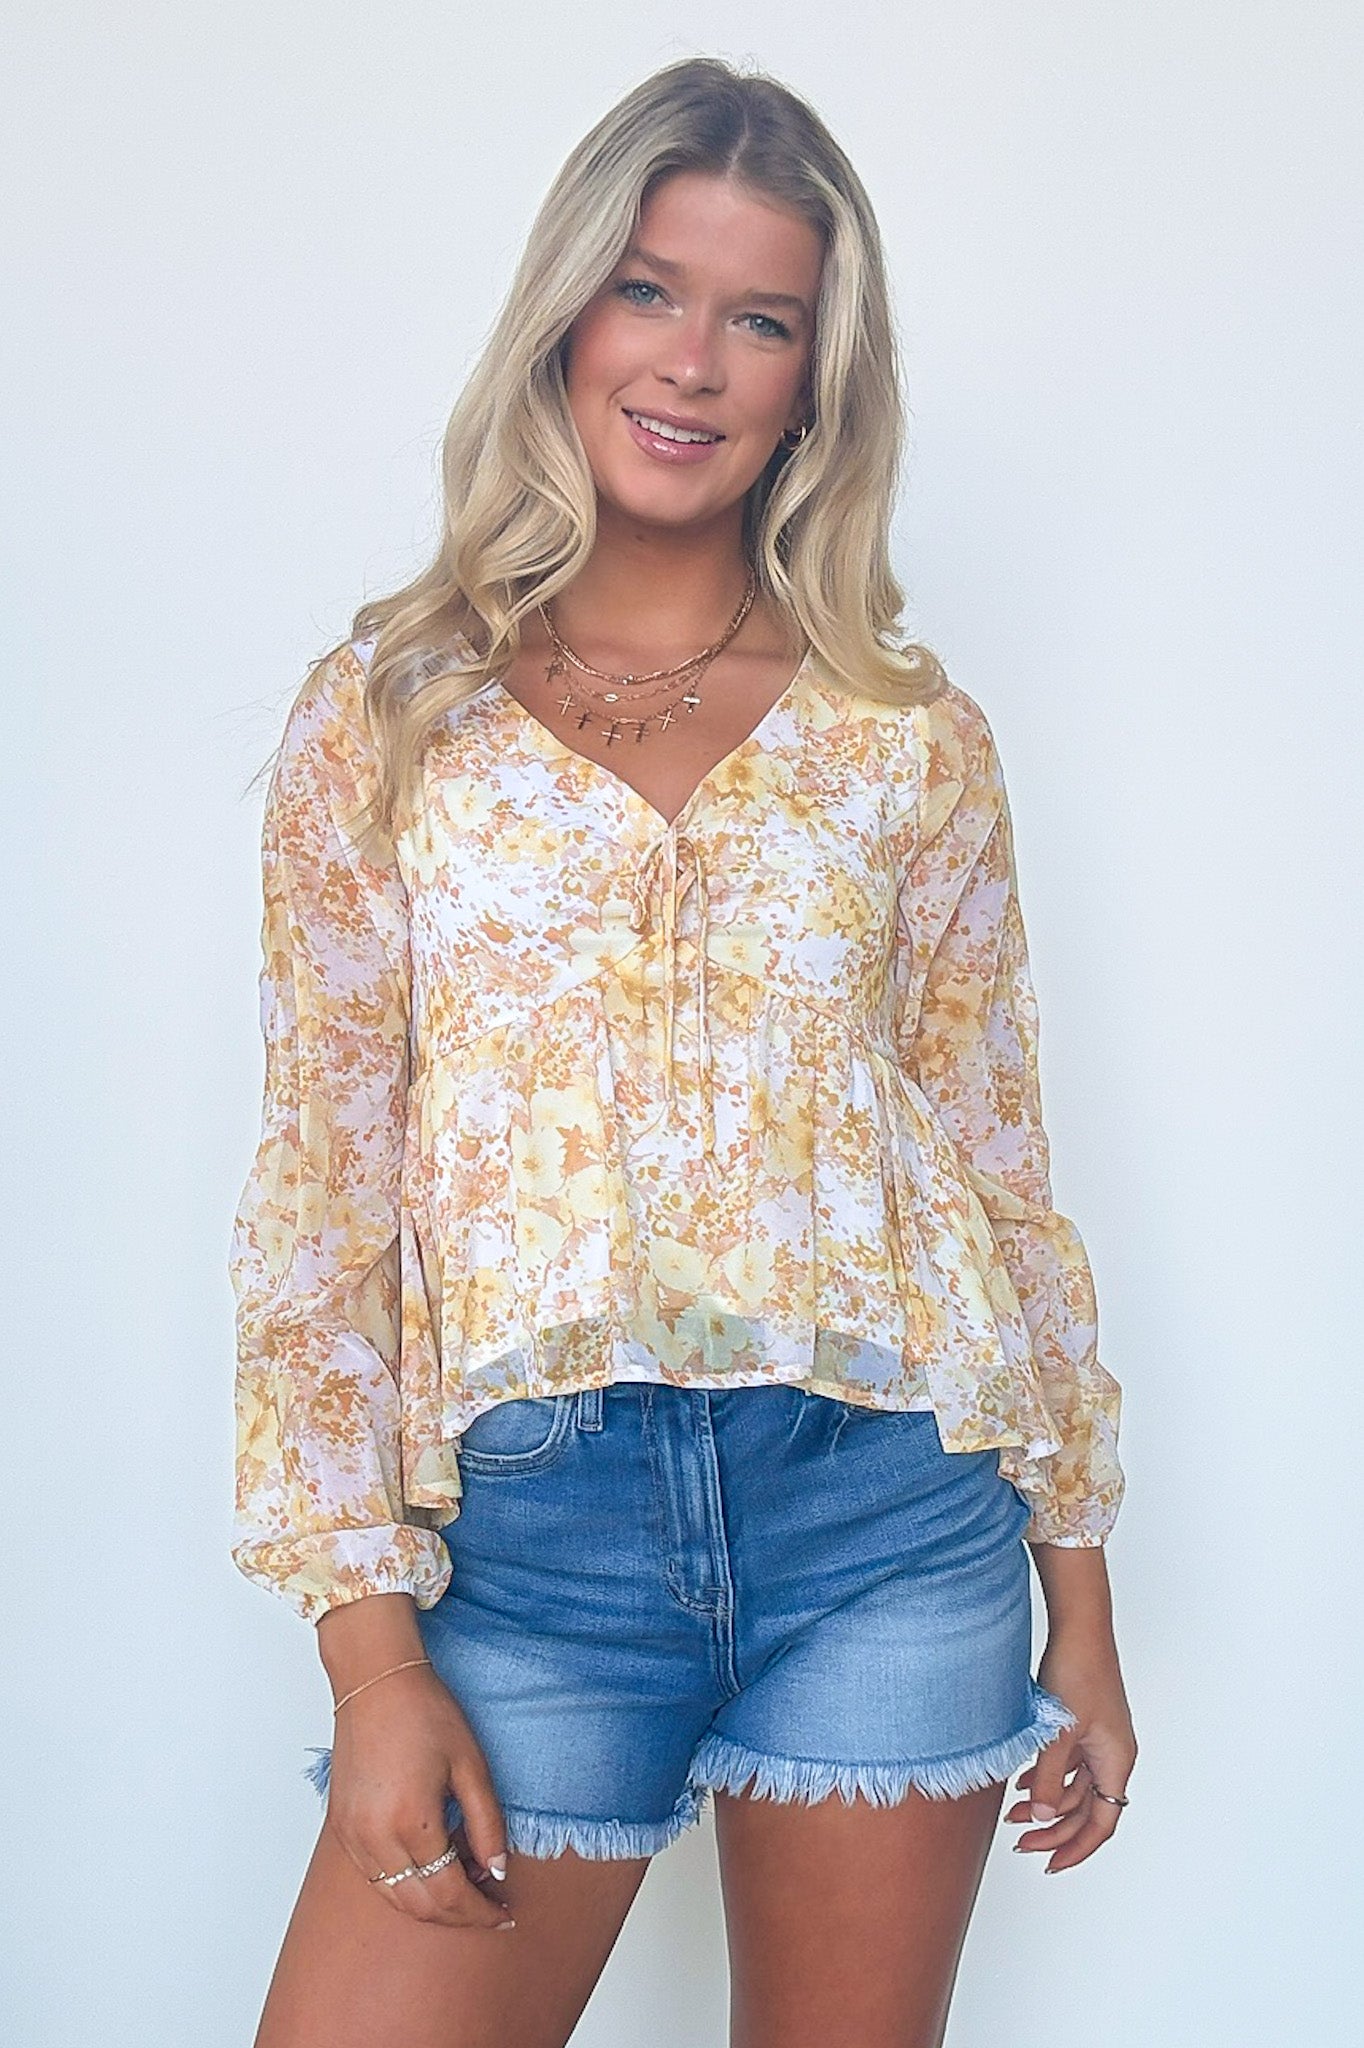  Elegant Ease Floral Print Swing Top - Madison and Mallory